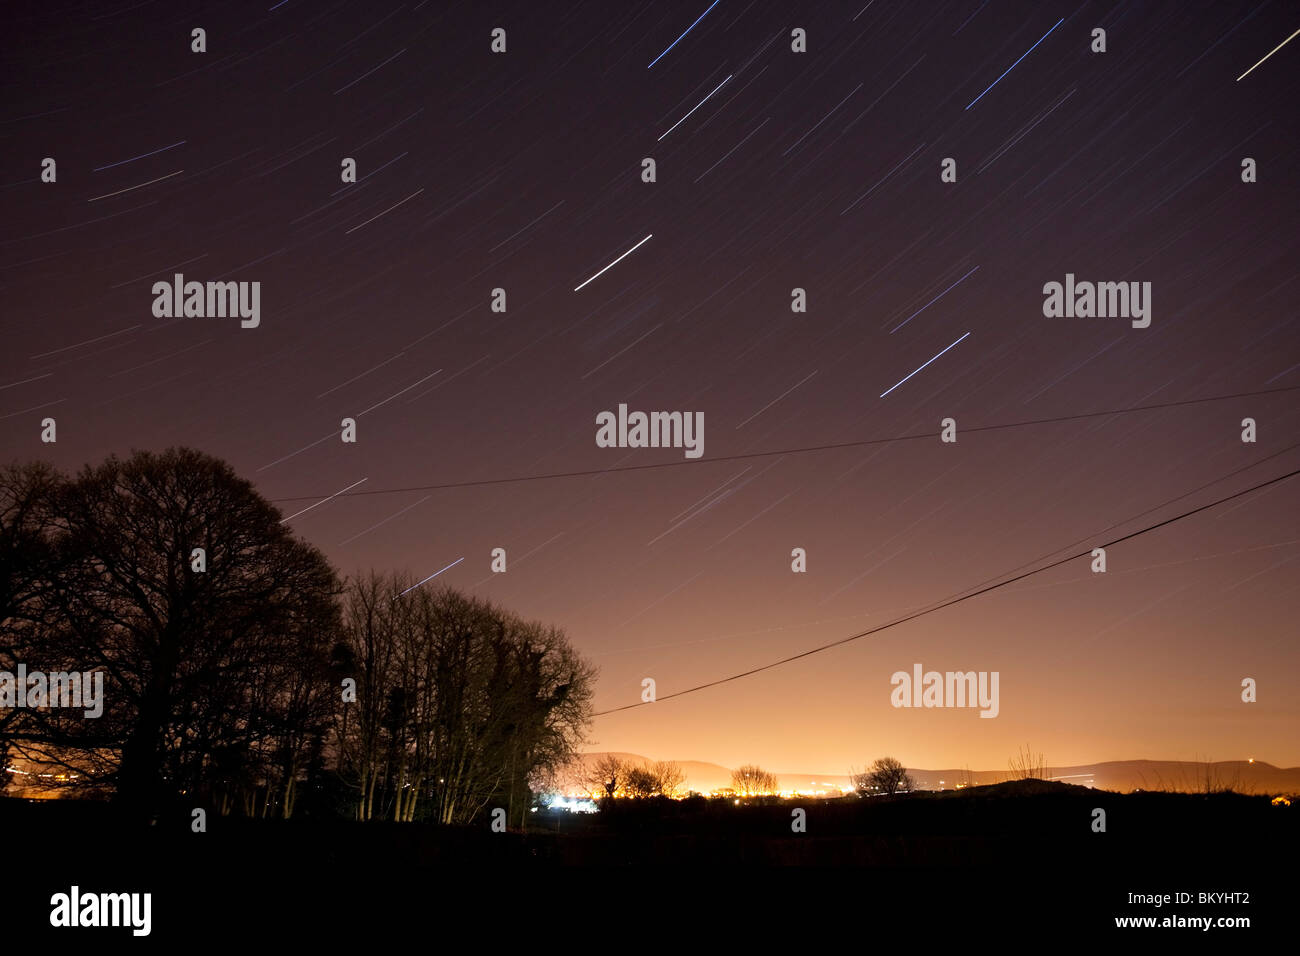 Star trail over the town of Dungiven, County Londonderry, Northern Ireland Stock Photo